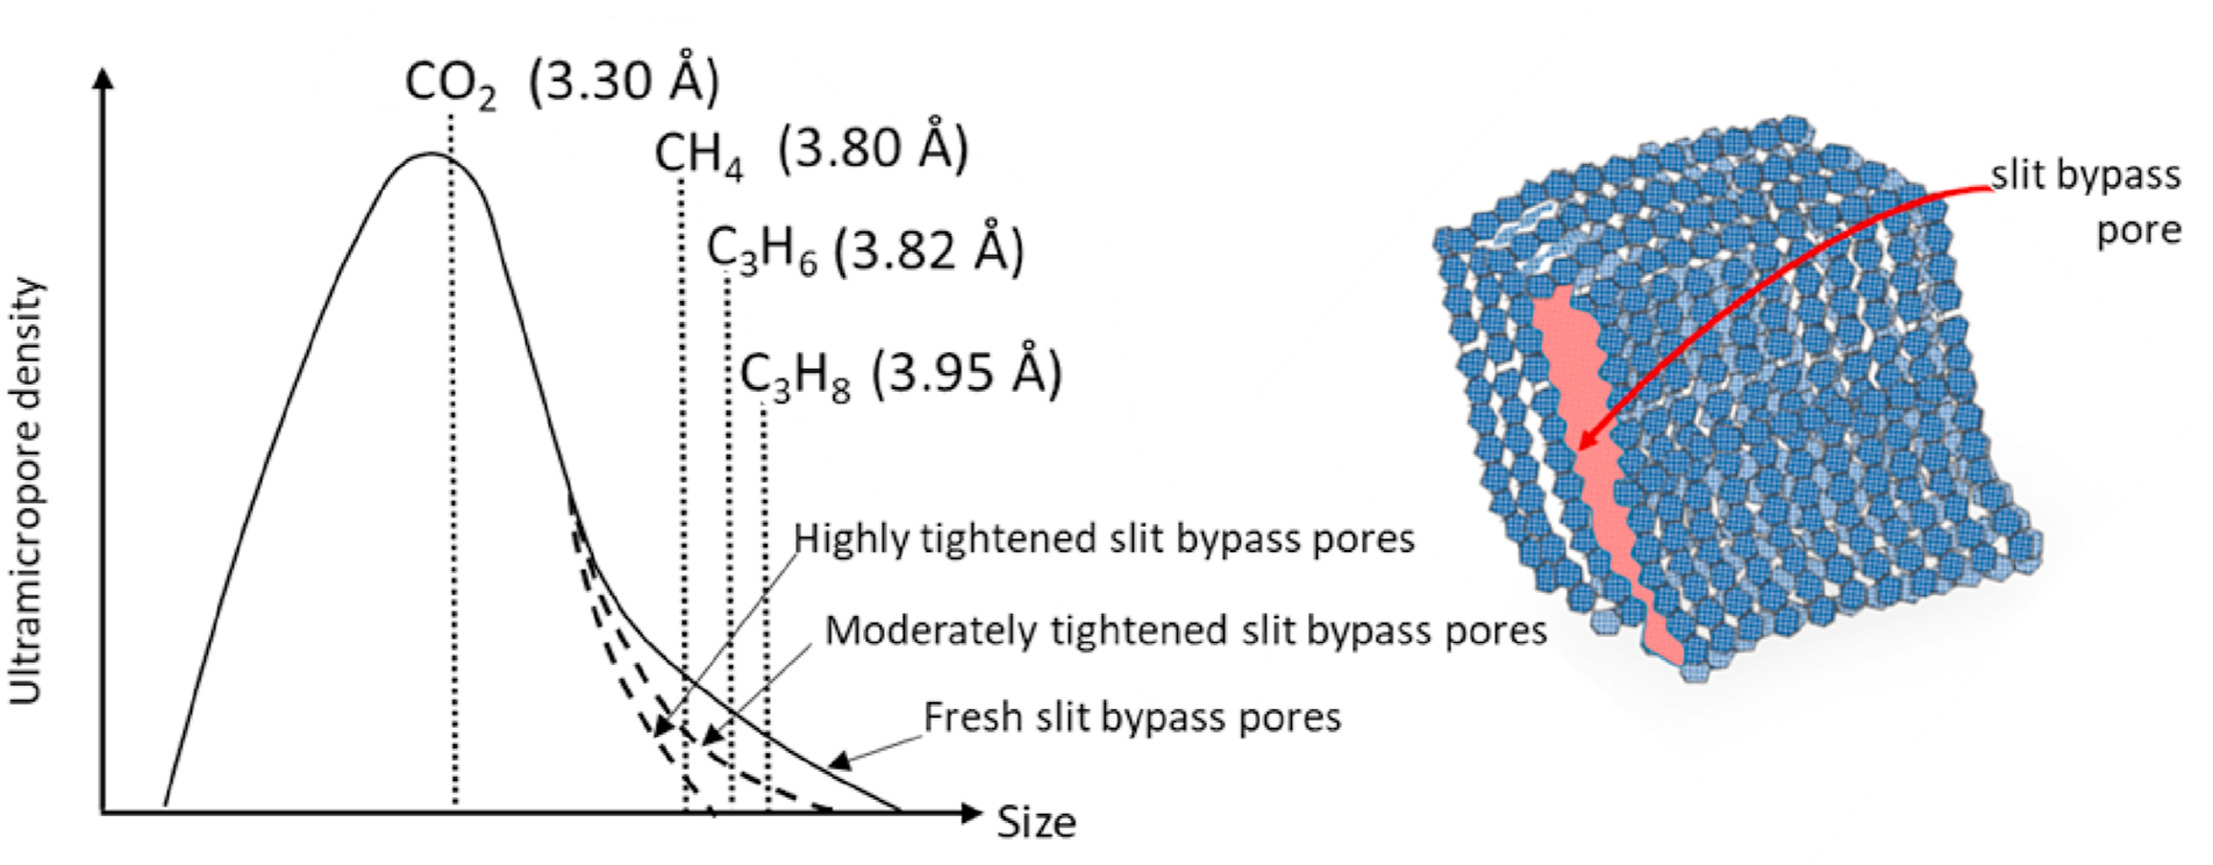 Graphical Abstract showing density vs. size of molecules and how that fits into the bypass pores